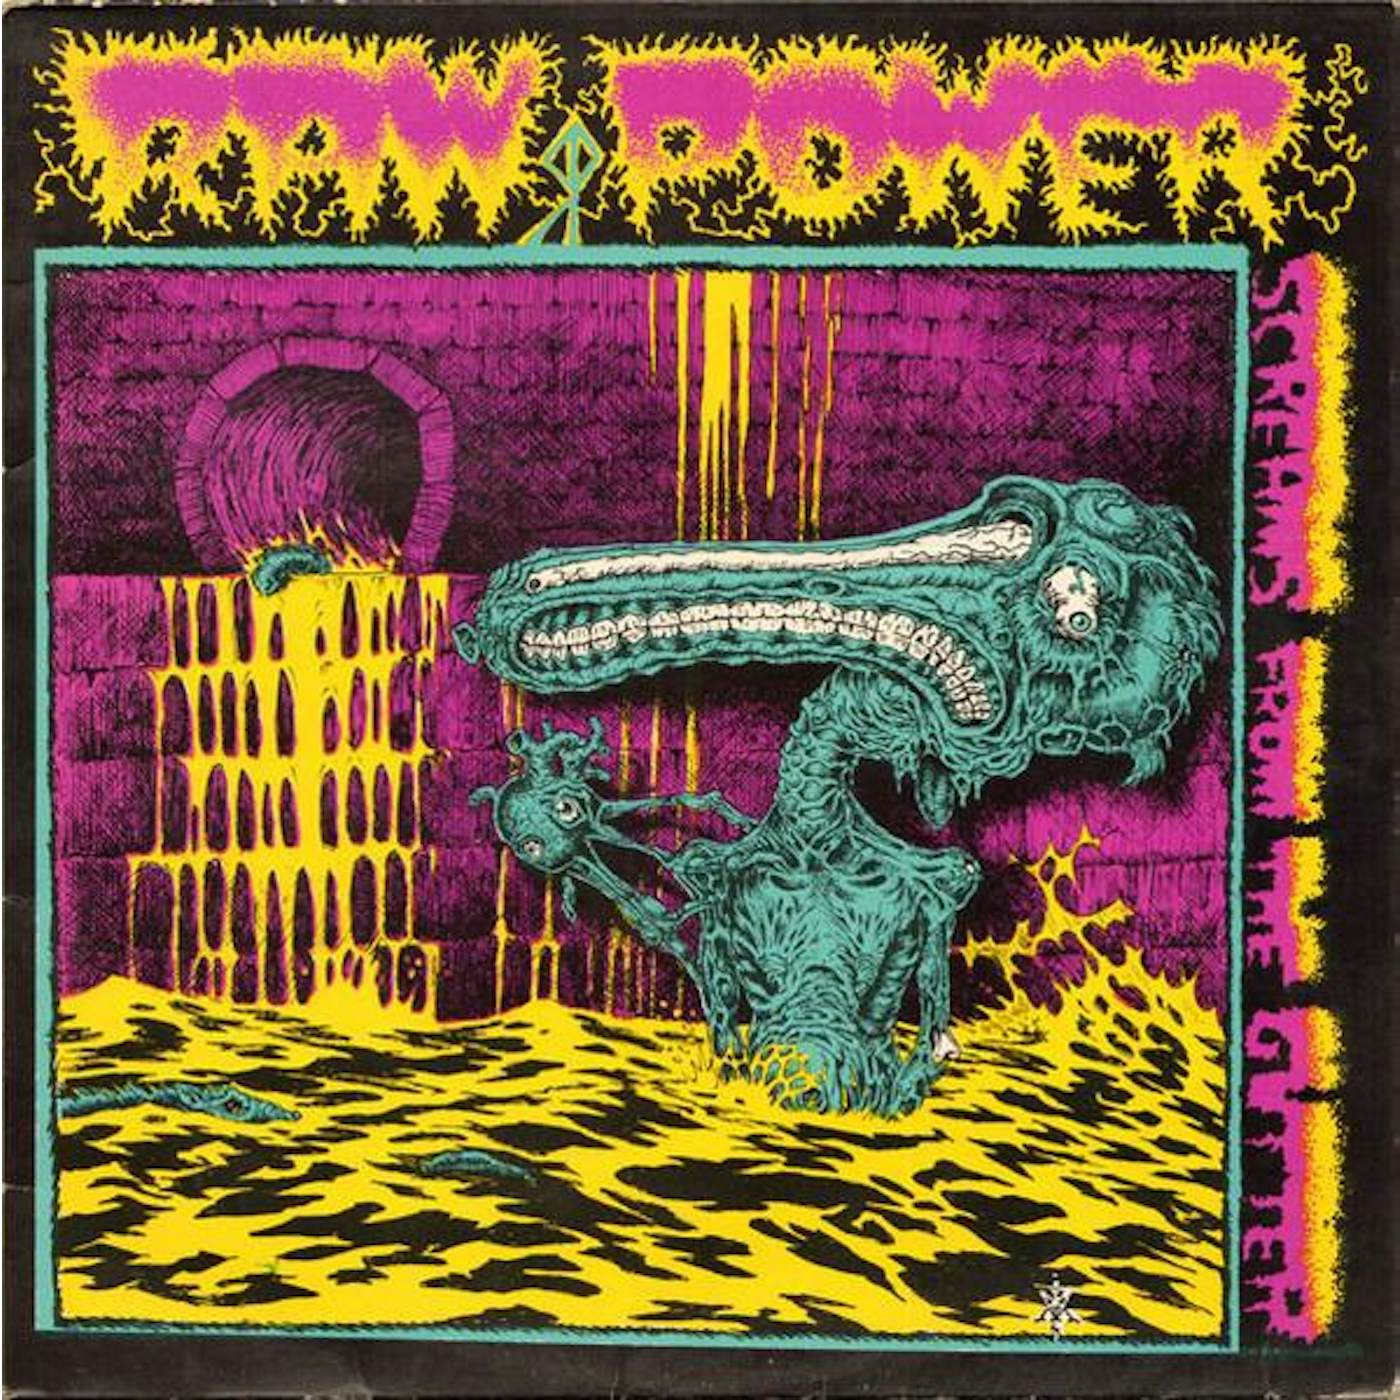 Raw Power SCREAMS FROM THE GUTTER: 35TH ANNIVERSARY Vinyl Record